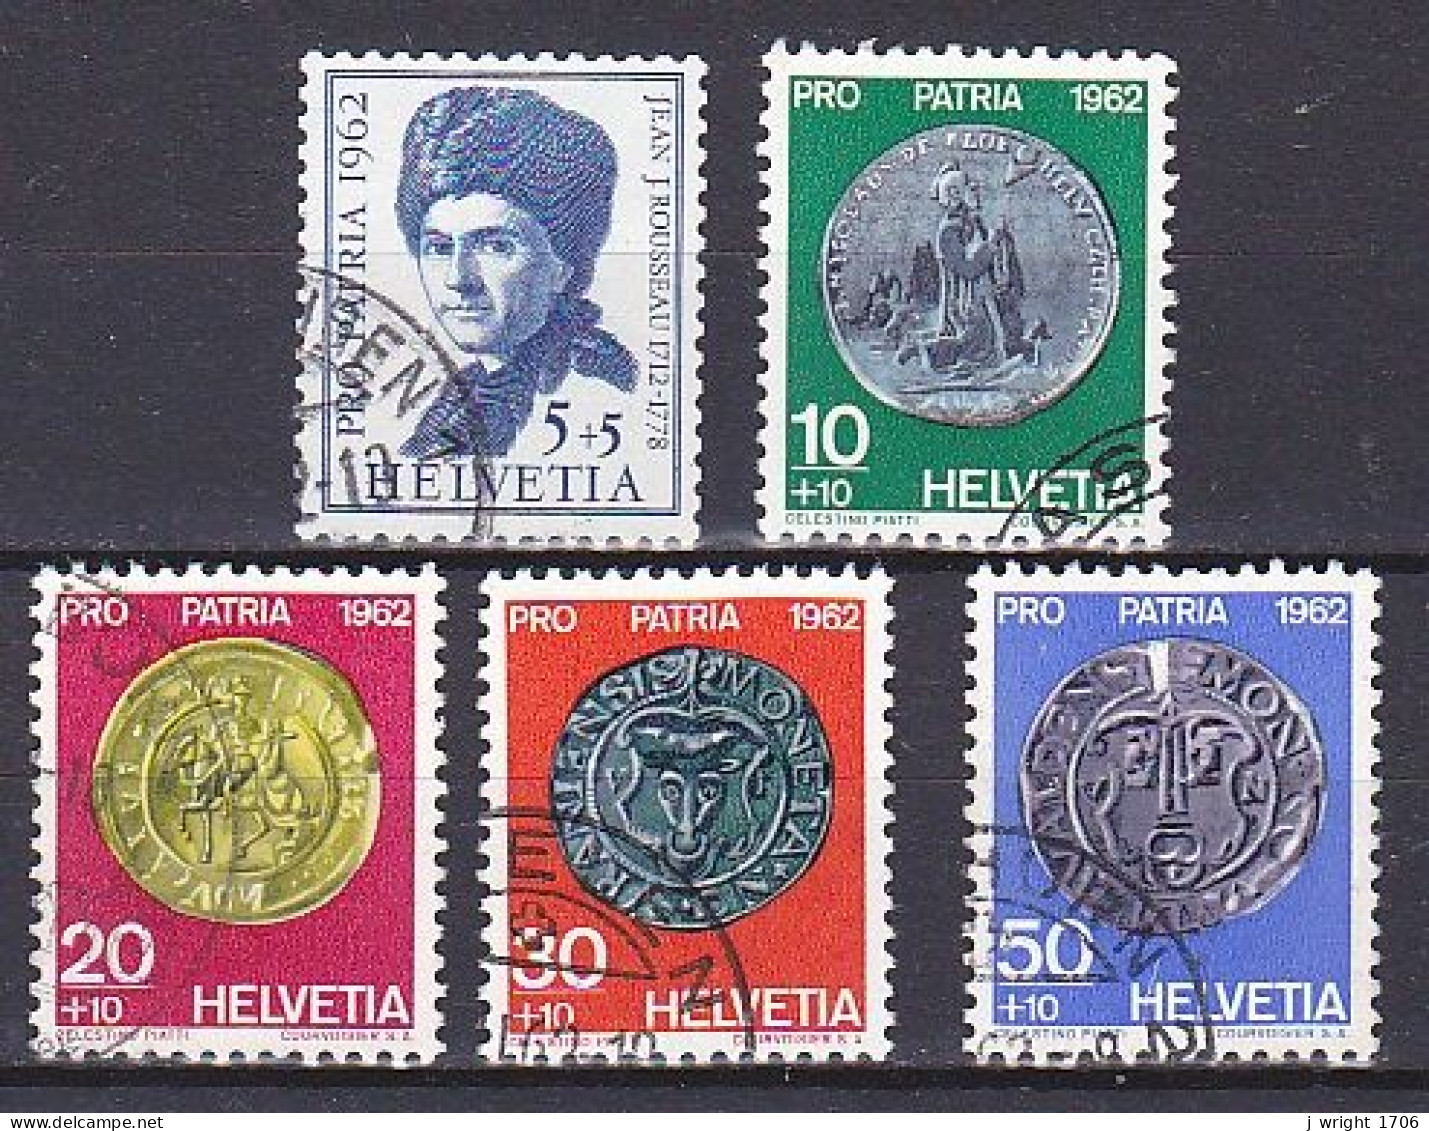 Switzerland, 1962, Pro Patria/Portrait & Old Coins, Set, USED - Used Stamps